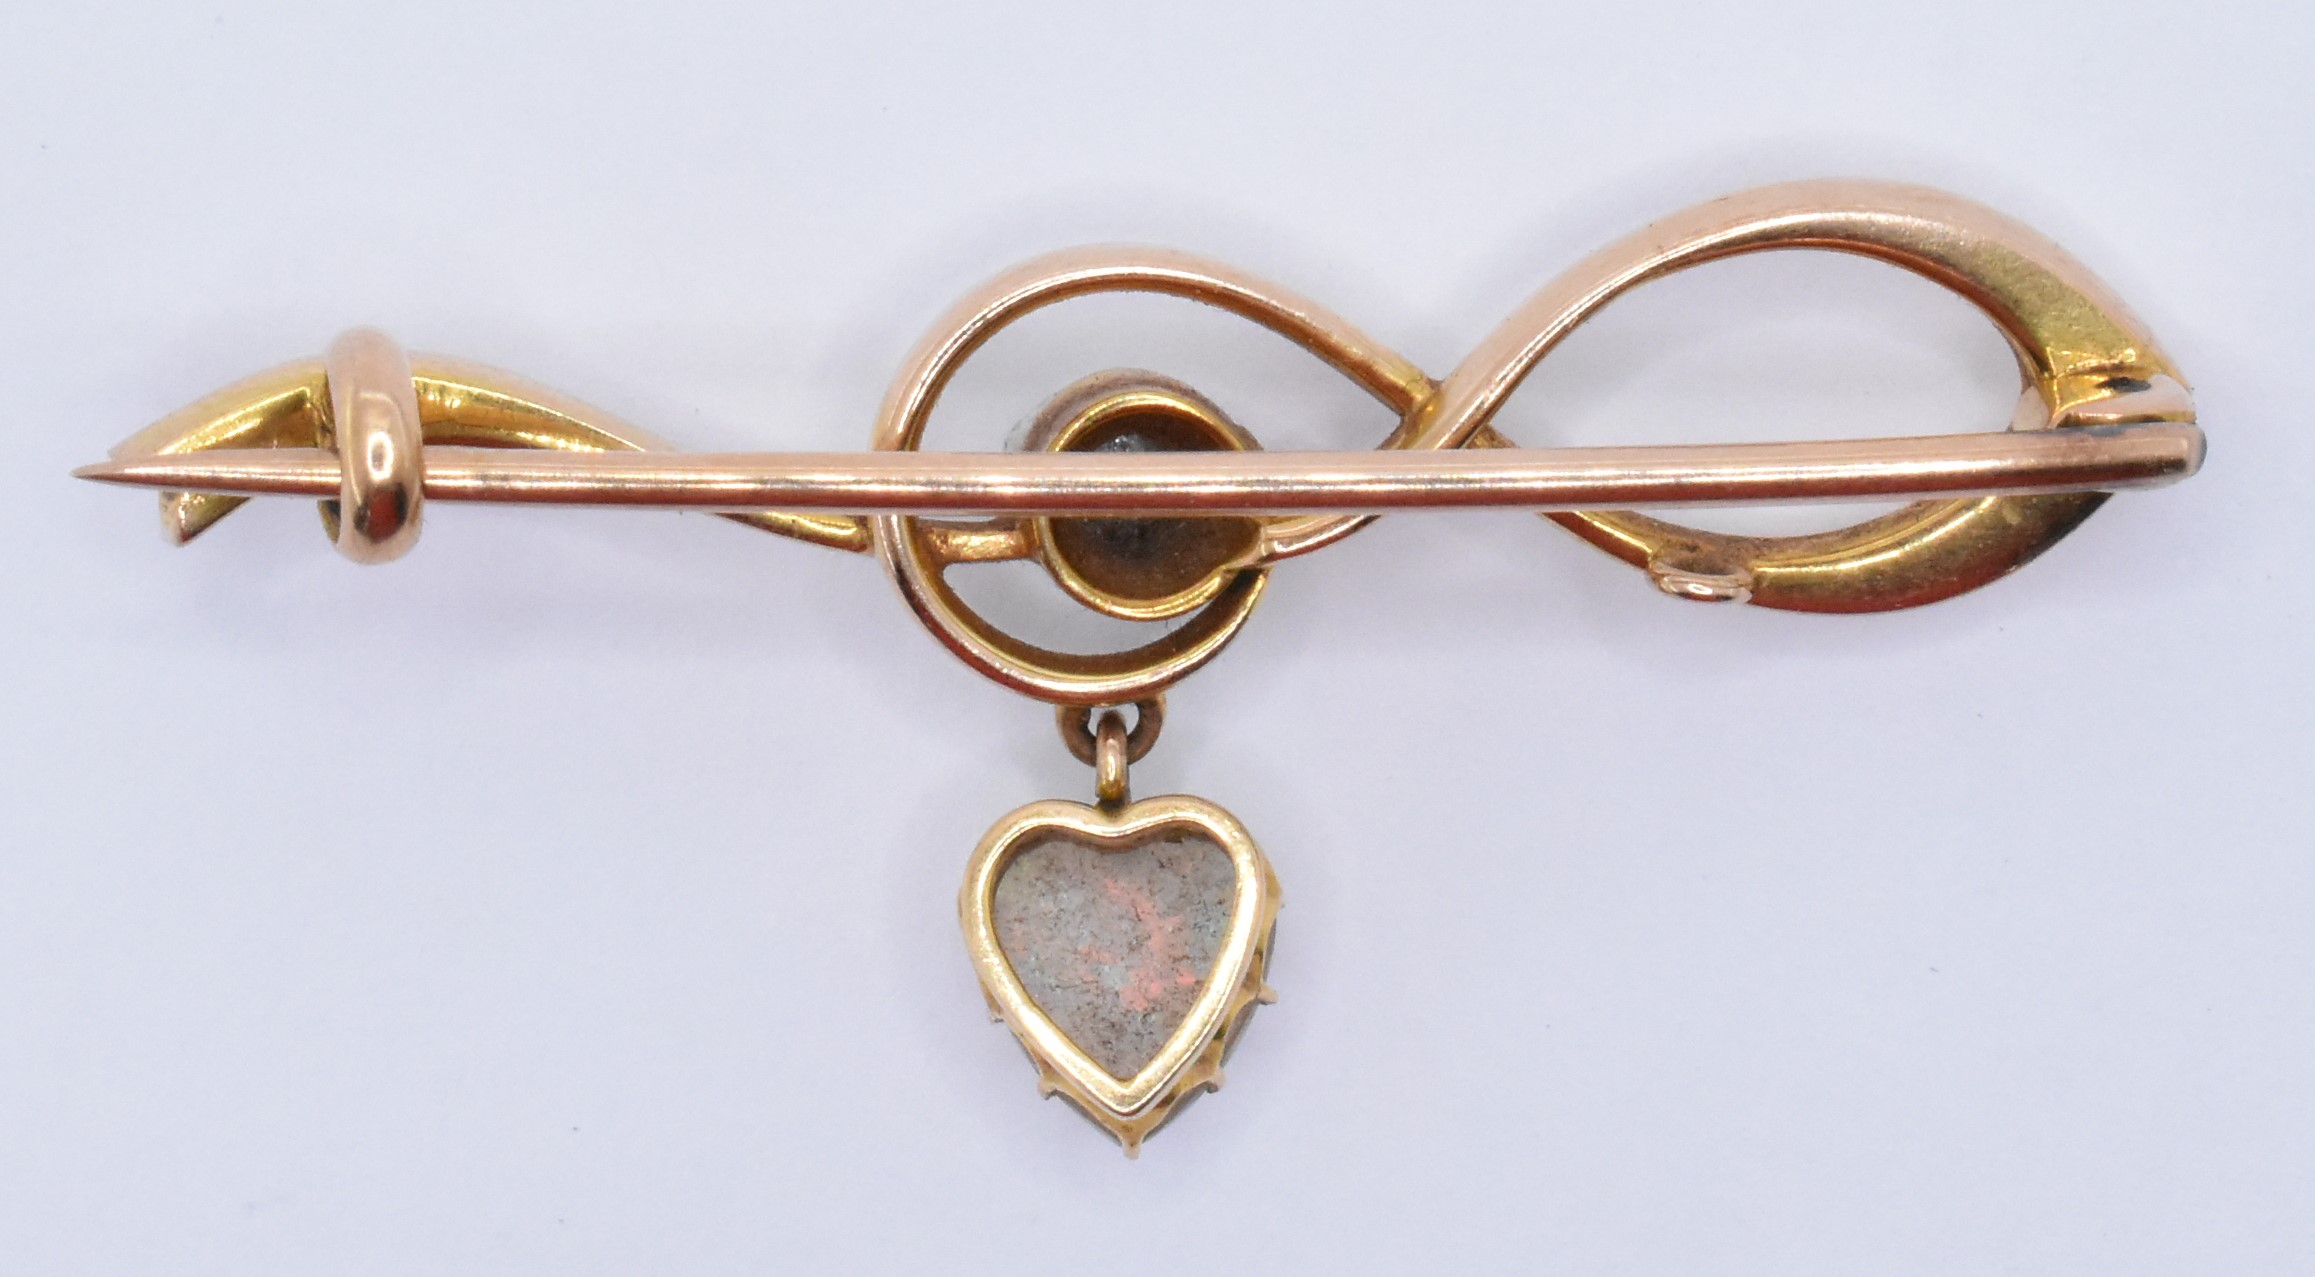 GOLD DIAMOND AND OPAL BAR BROOCH - Image 3 of 3